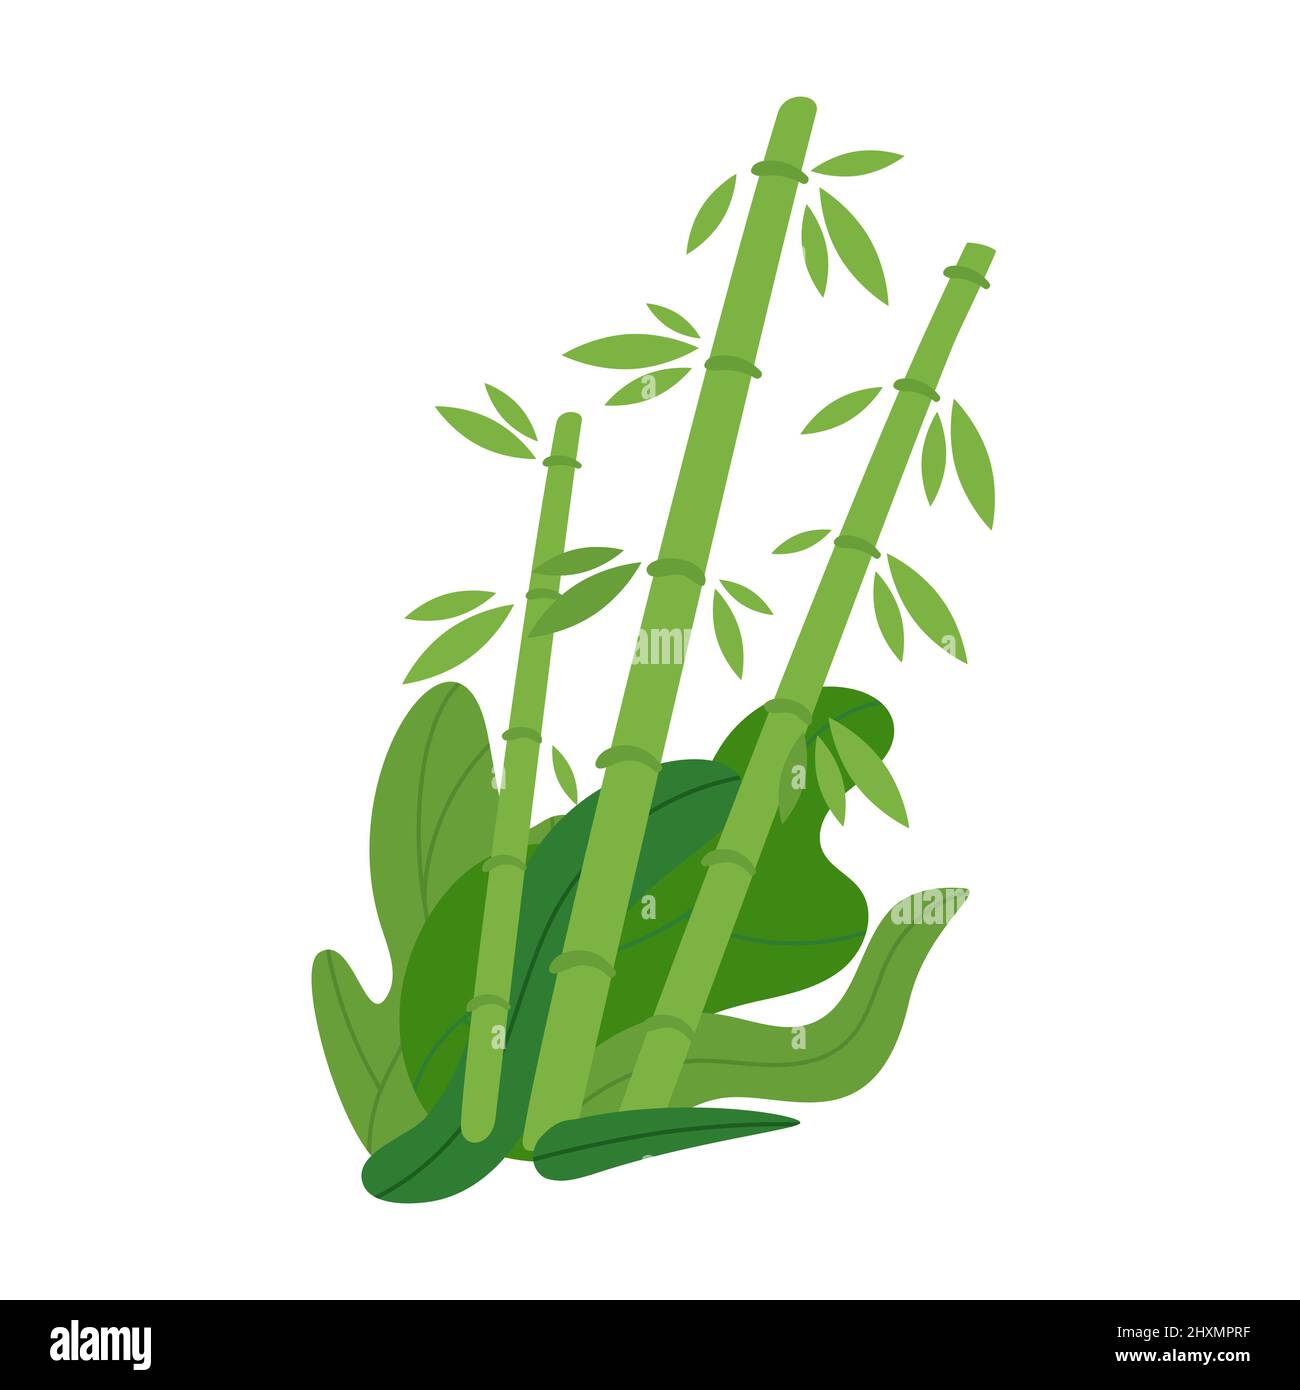 Vector flat style illustration of a bamboo Stock Vector